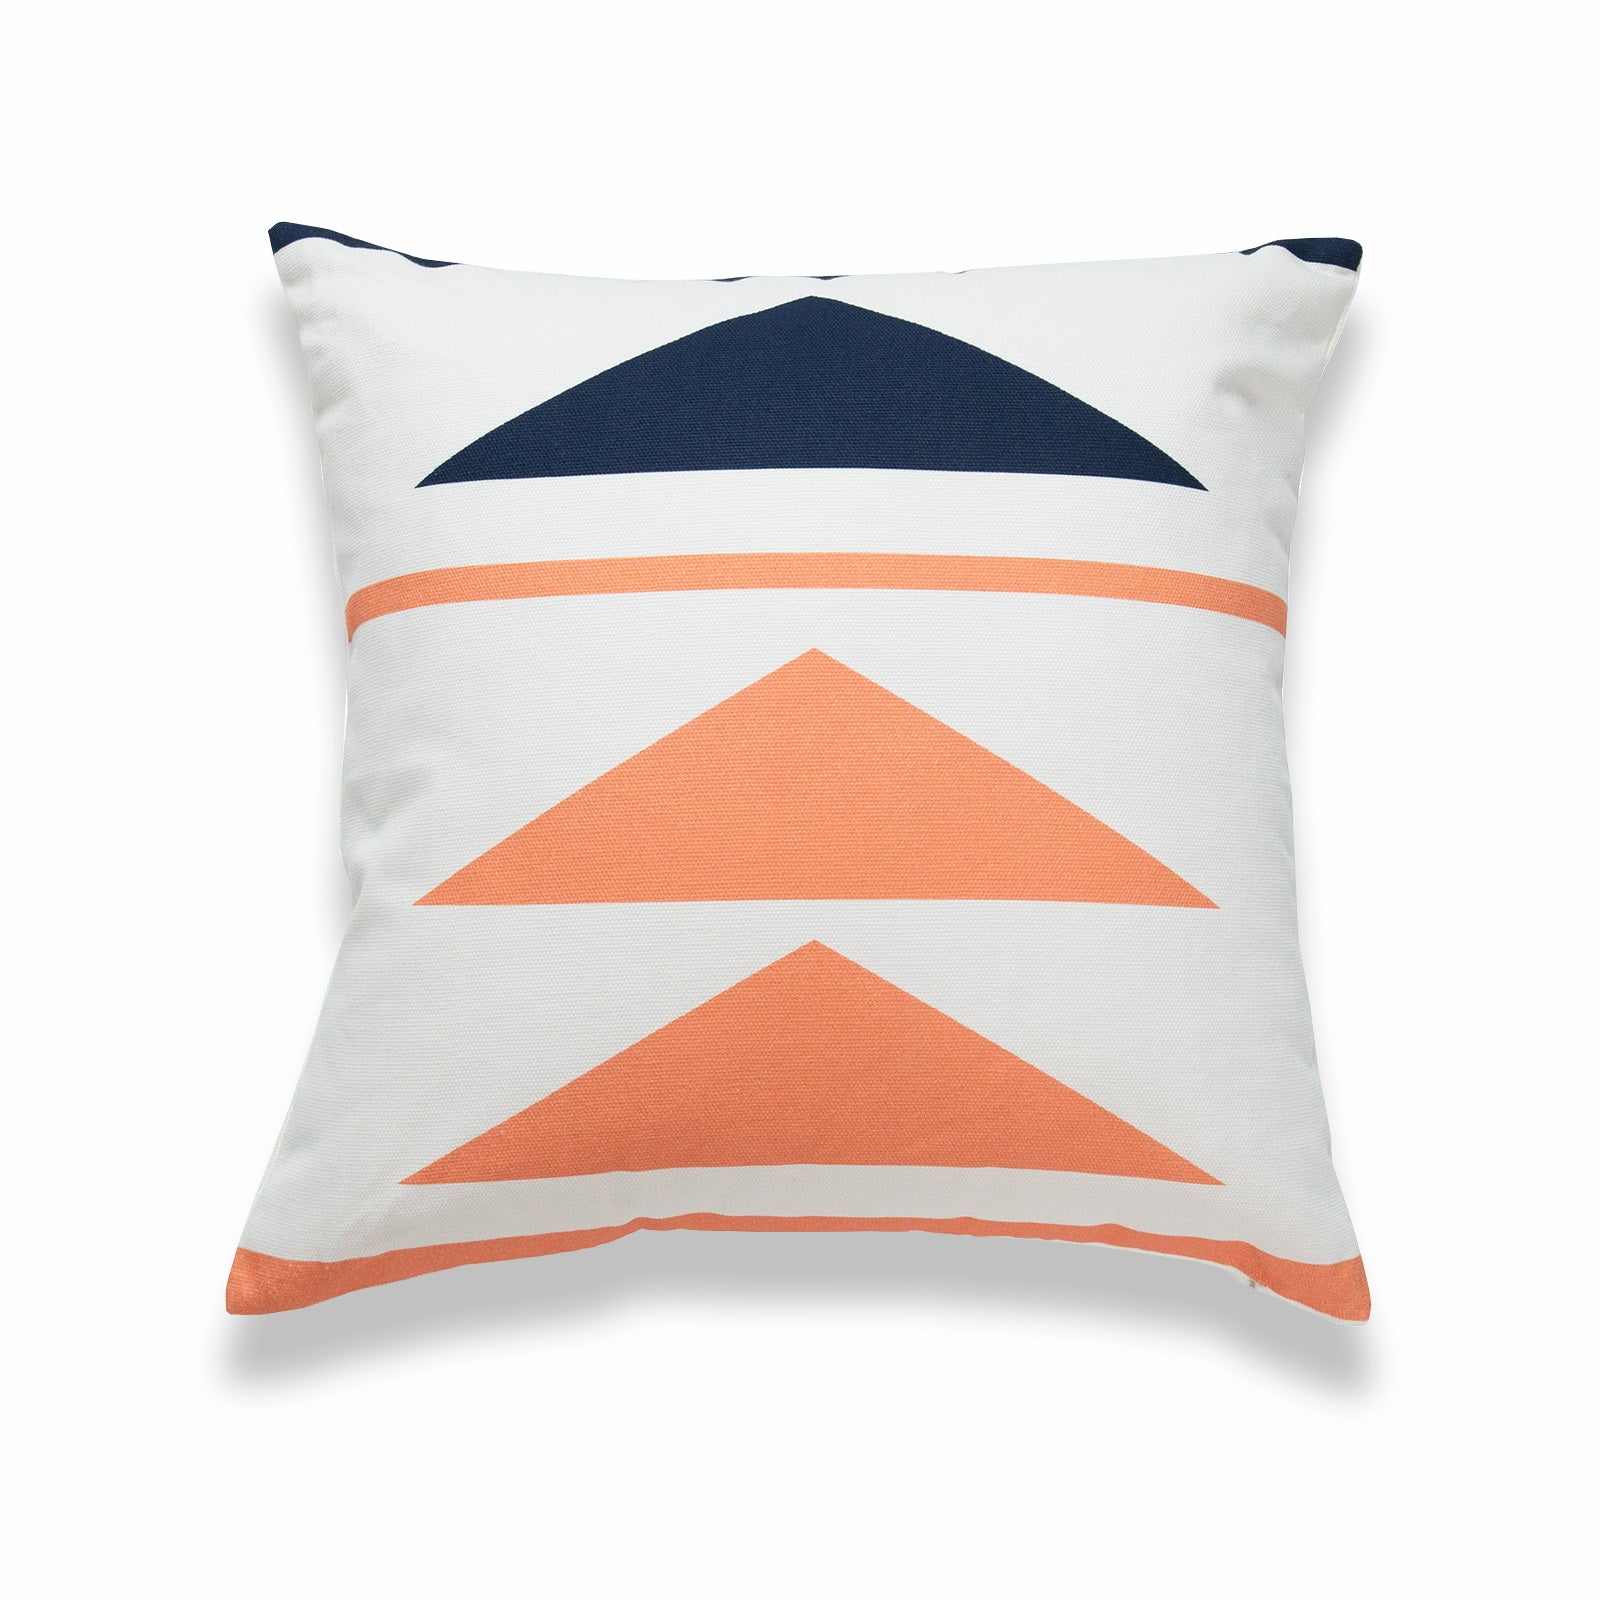 Aztec Print Pillow Cover, Triangle, Navy Blue Coral Orange, 18"x18"